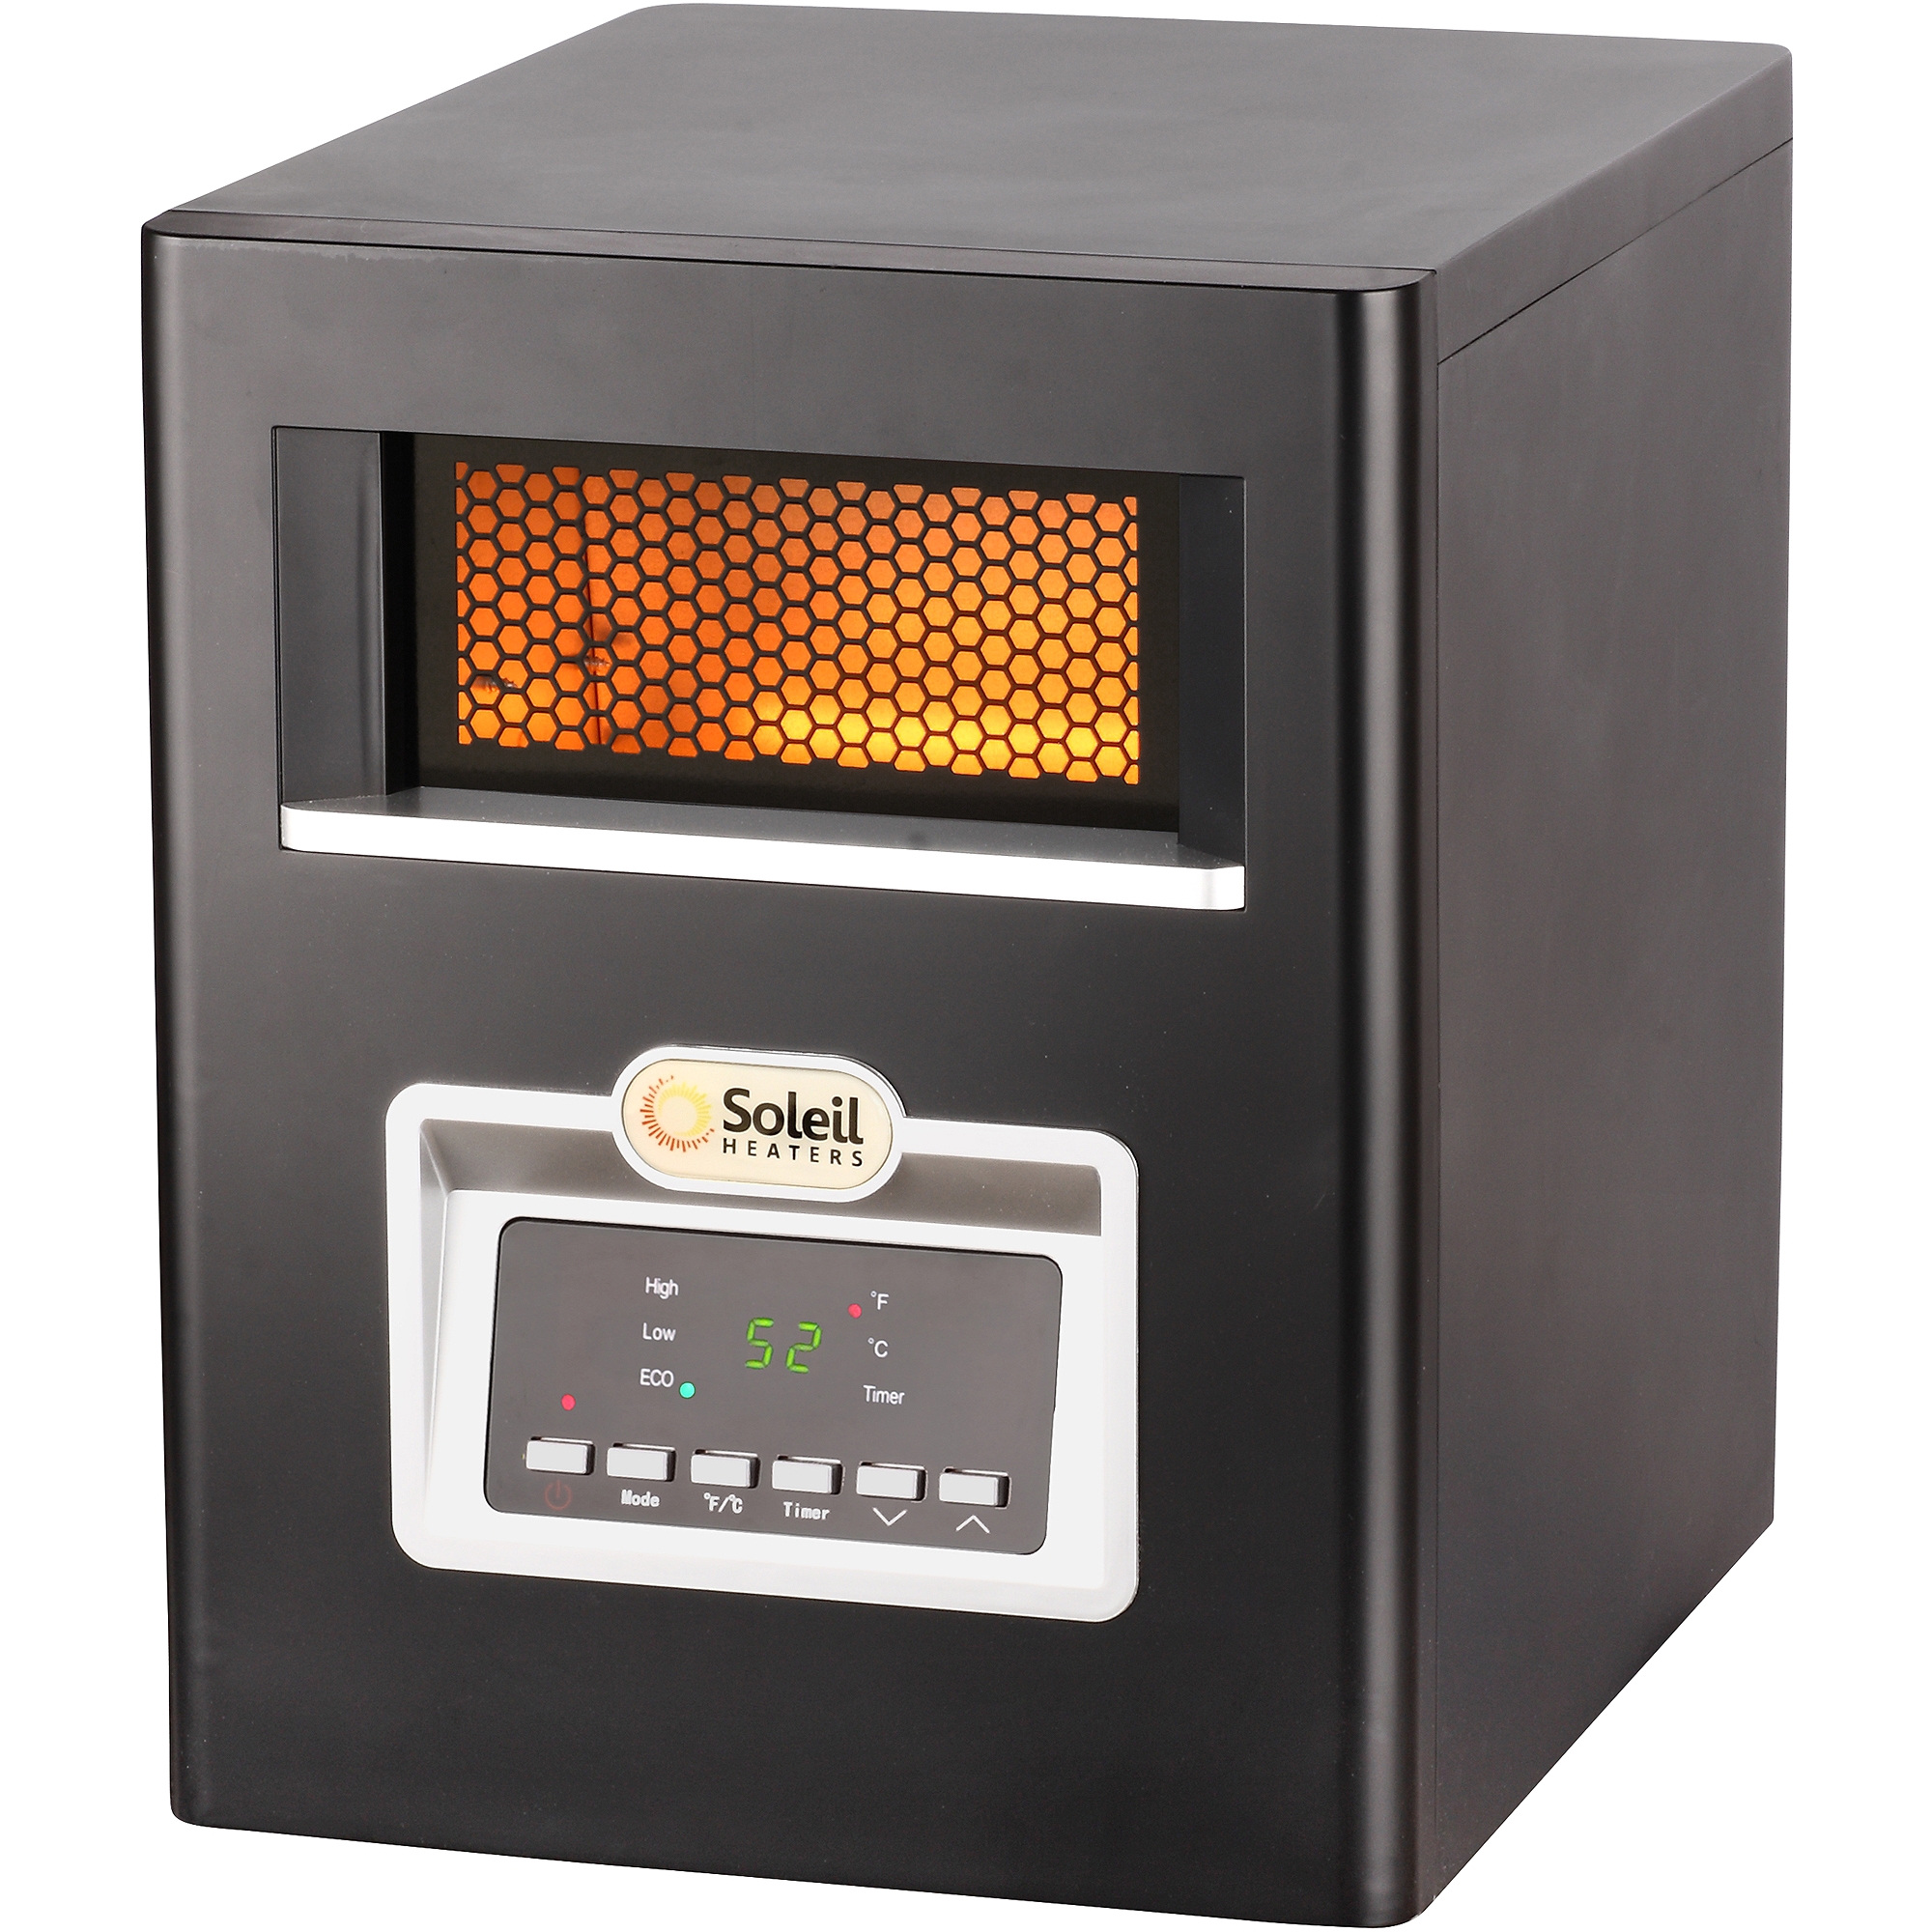 Mainstays Electric Fireplace with 4 Element Quartz Heater soleil Electric Infrared Cabinet Space Heater 1500w Ph 91f